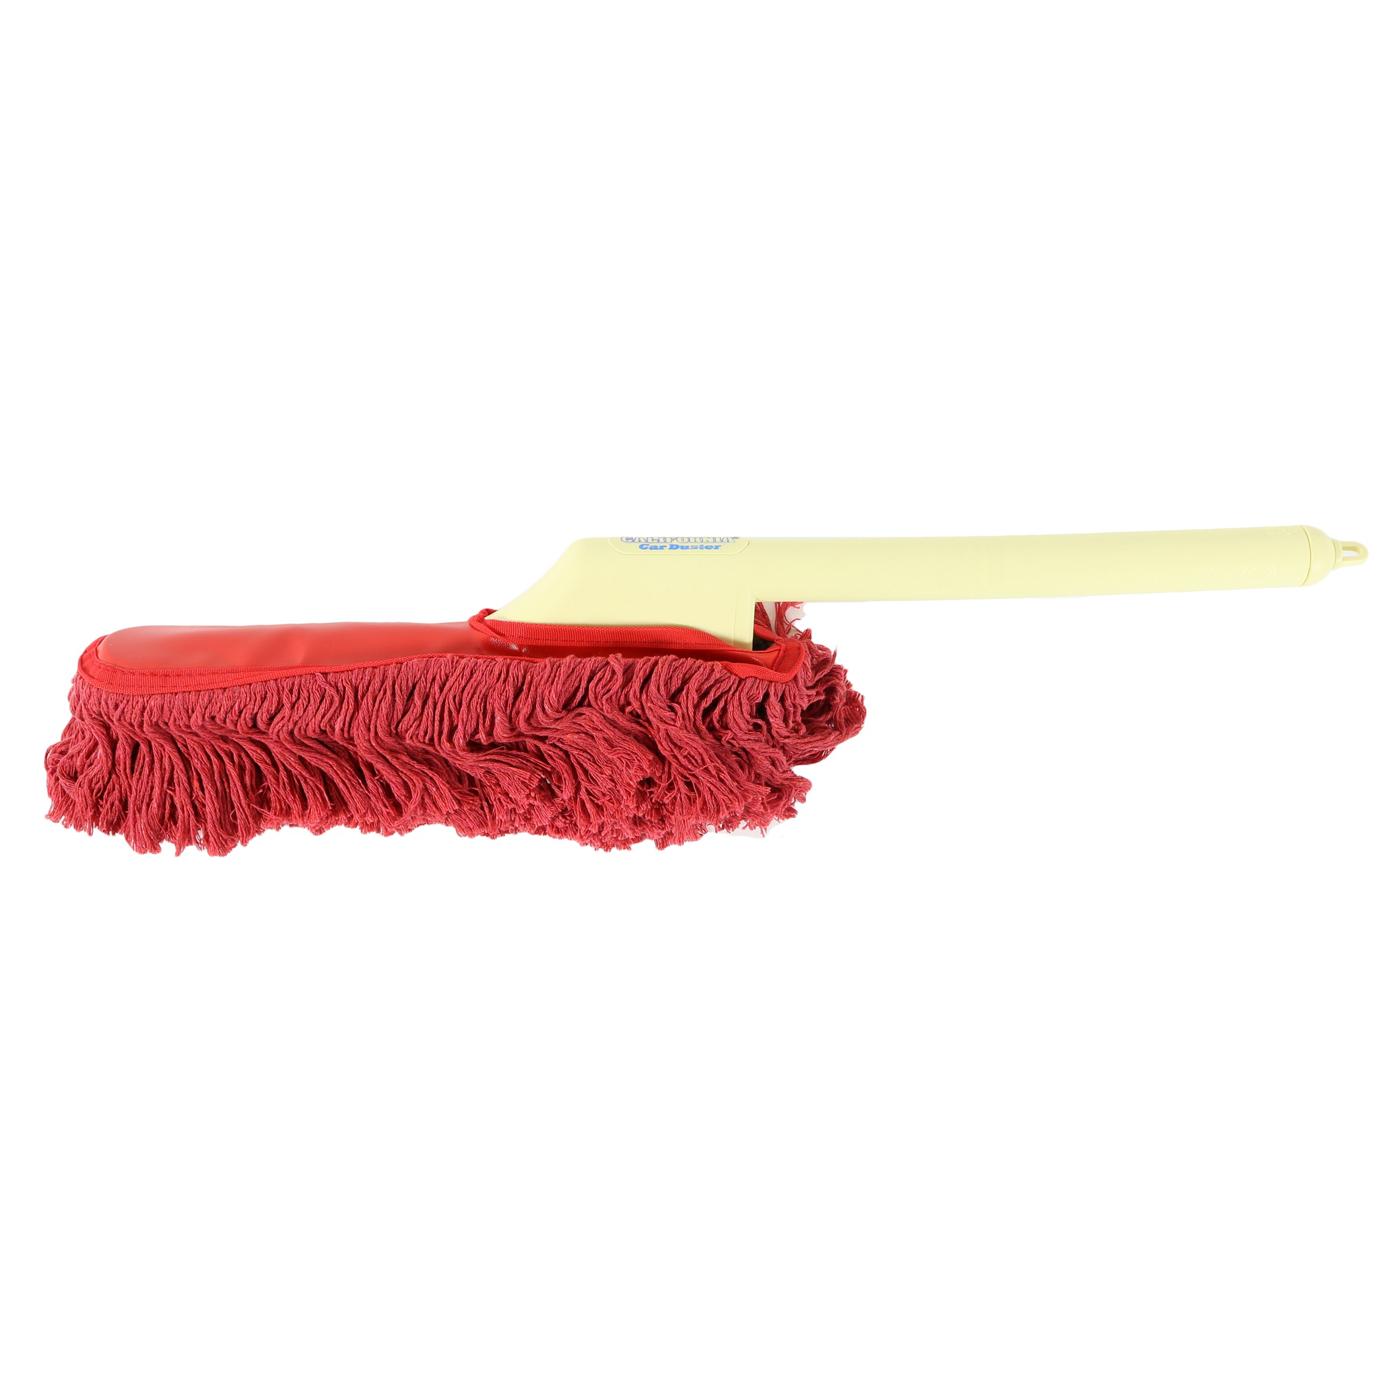 As Seen On TV The Original California Car Duster; image 1 of 2